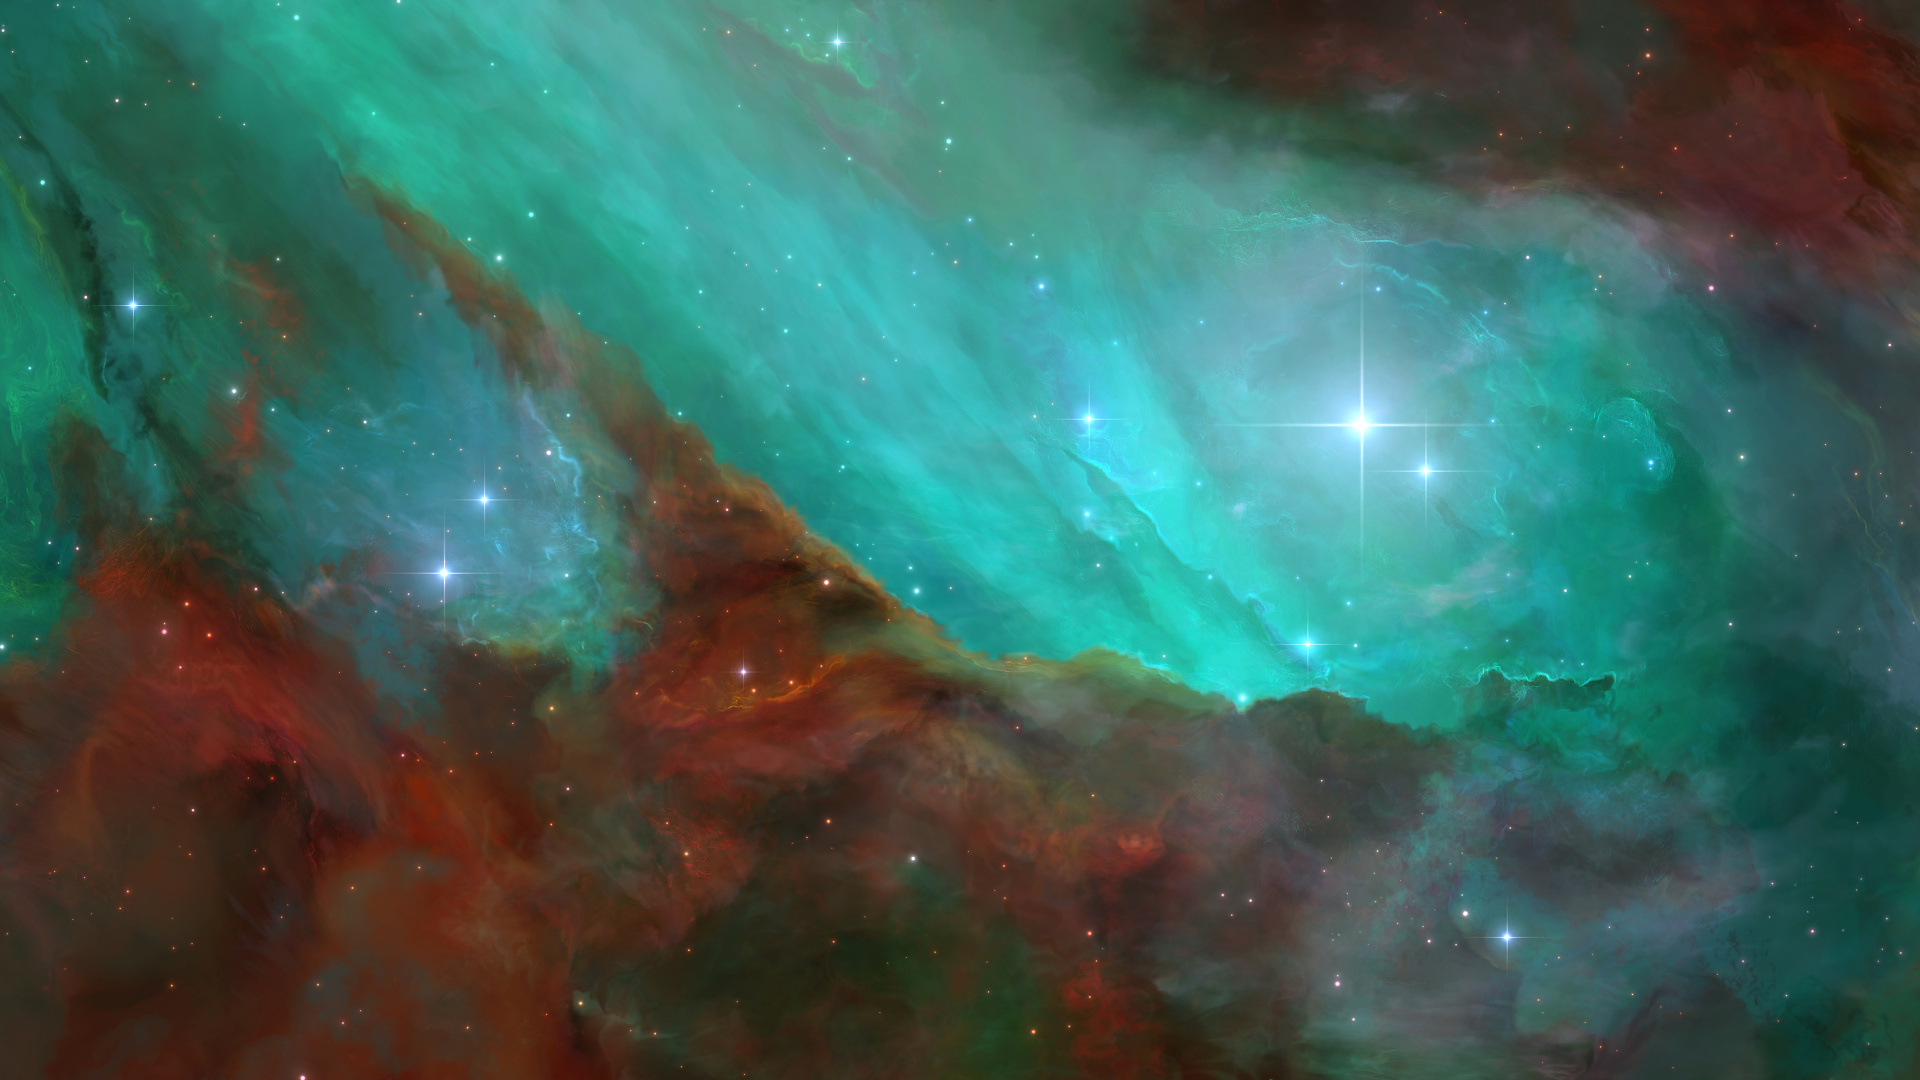 Atmosphere, Aurora, Nebula, Astronomical Object, Galaxy. Wallpaper in 1920x1080 Resolution